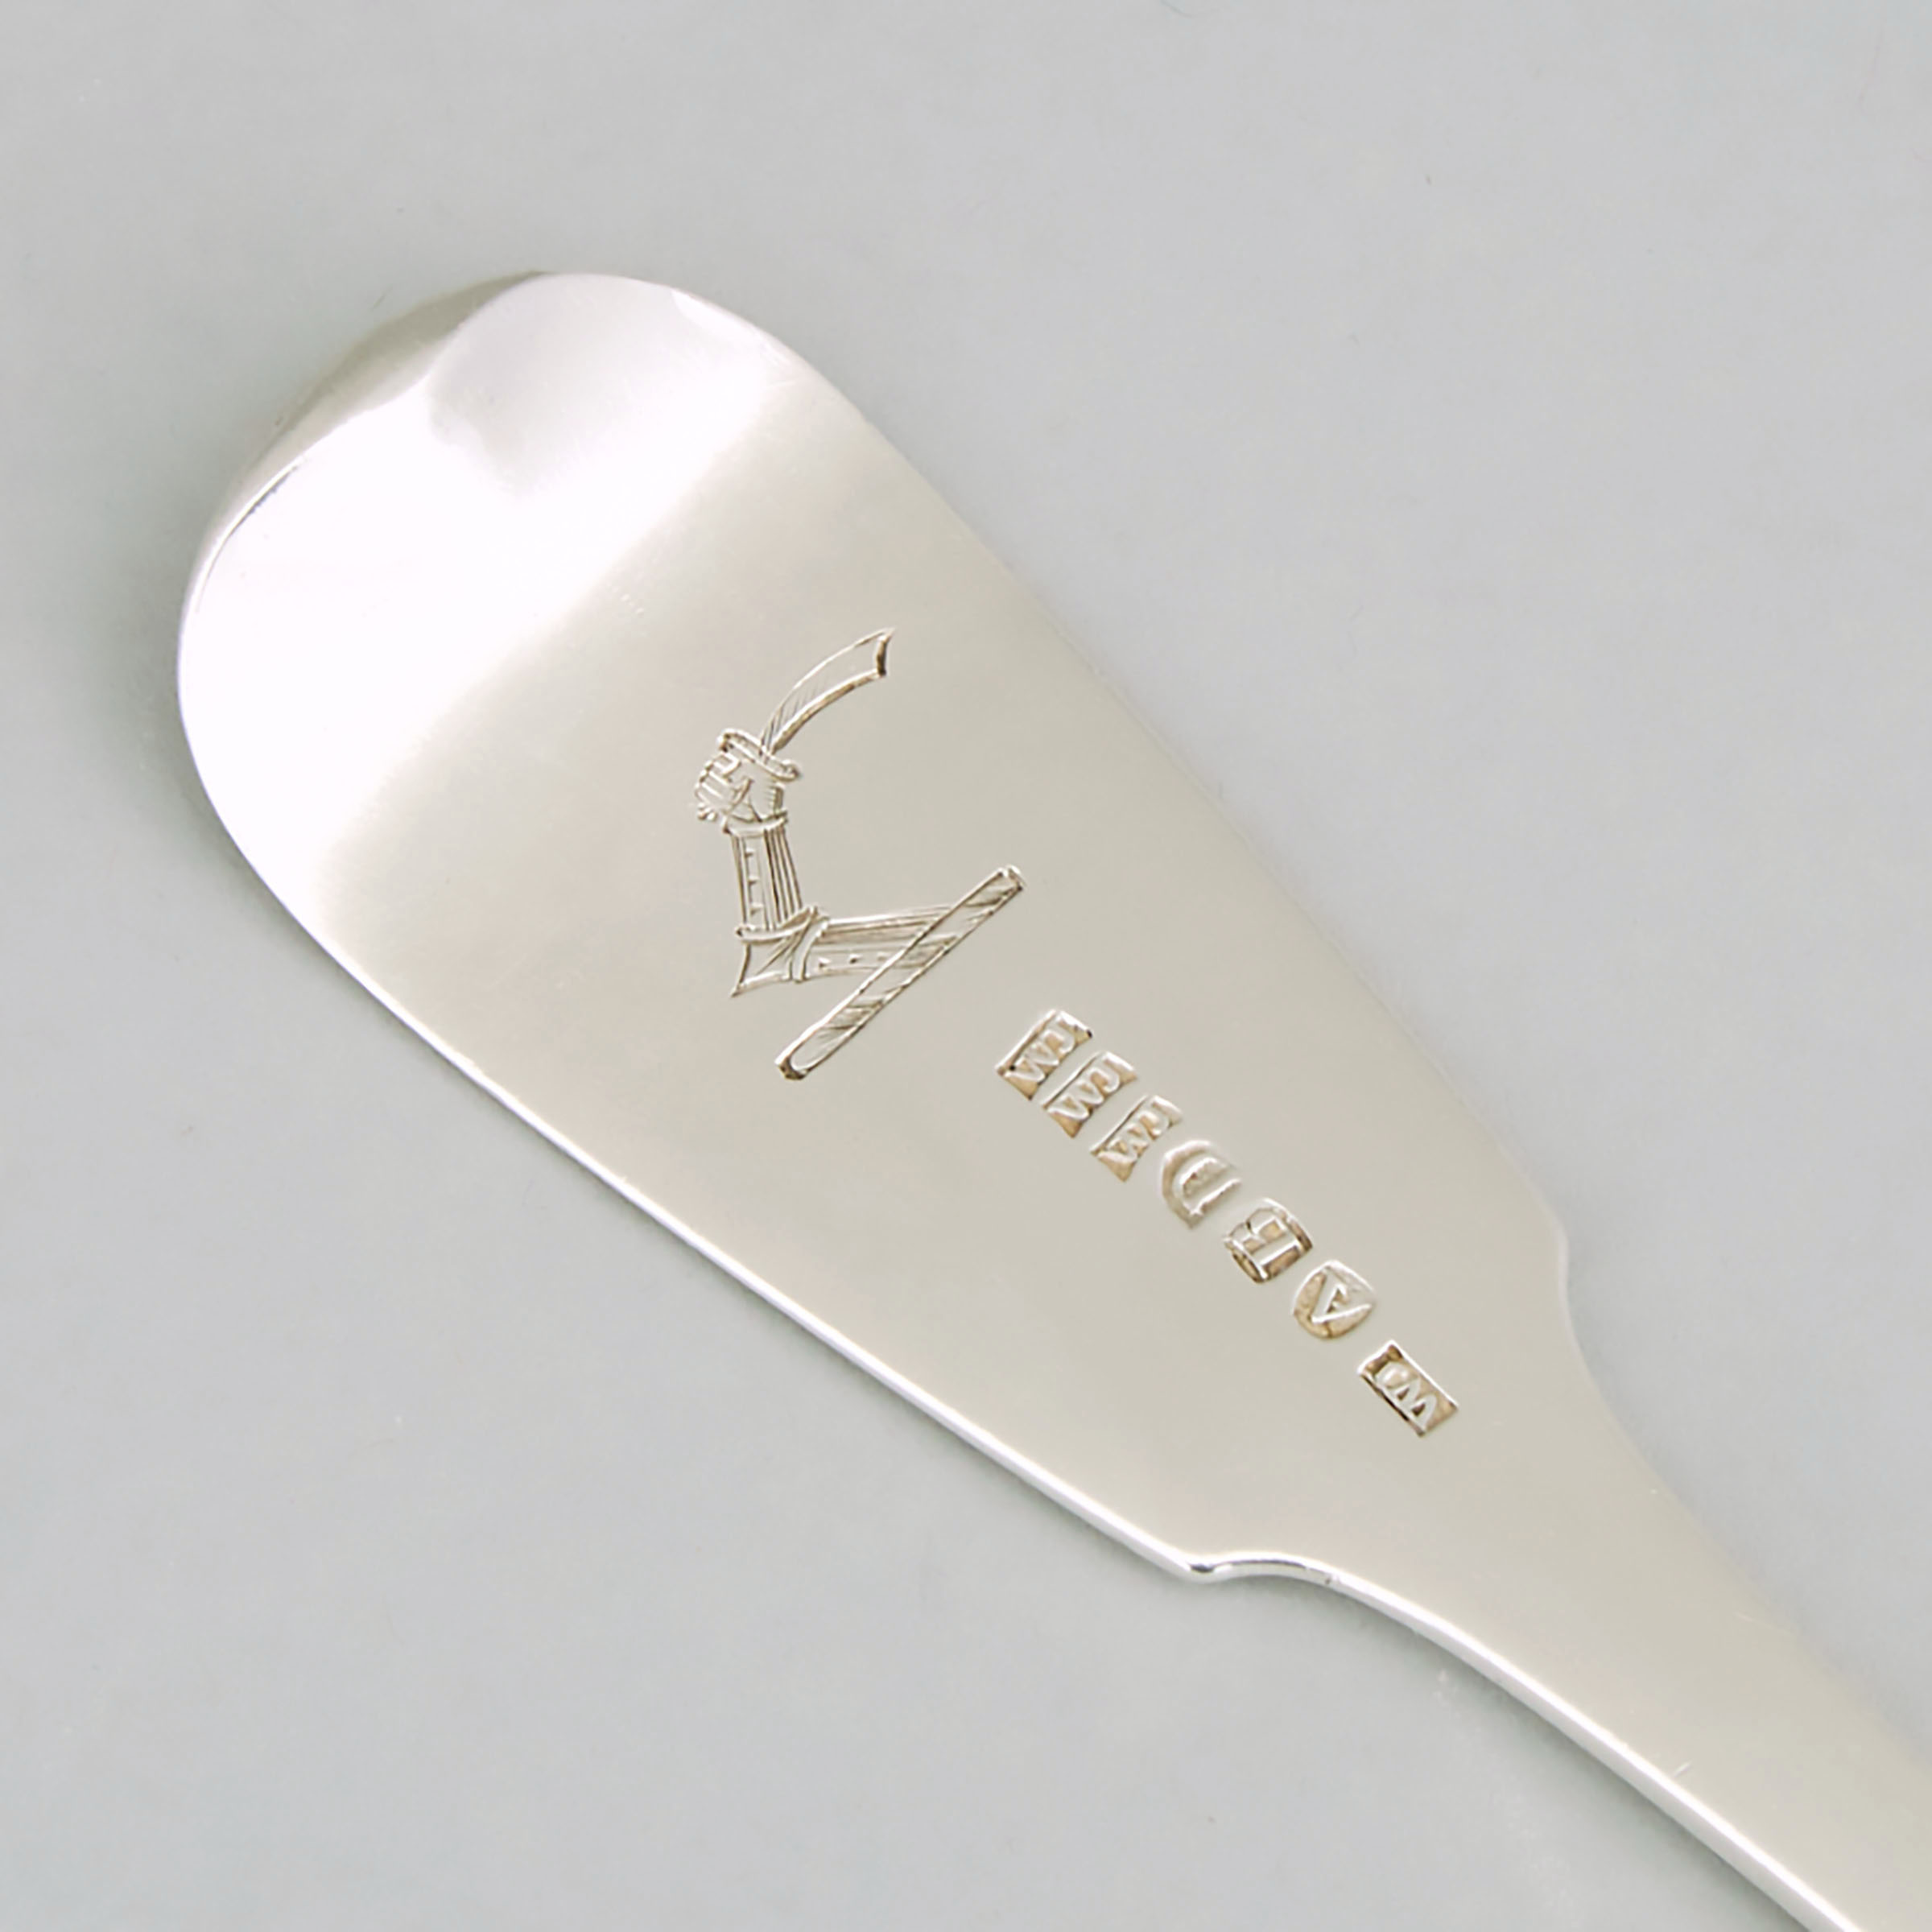 Scottish Provincial Silver Fiddle Pattern Table Spoon, William Jamieson, Aberdeen, c.1806-40